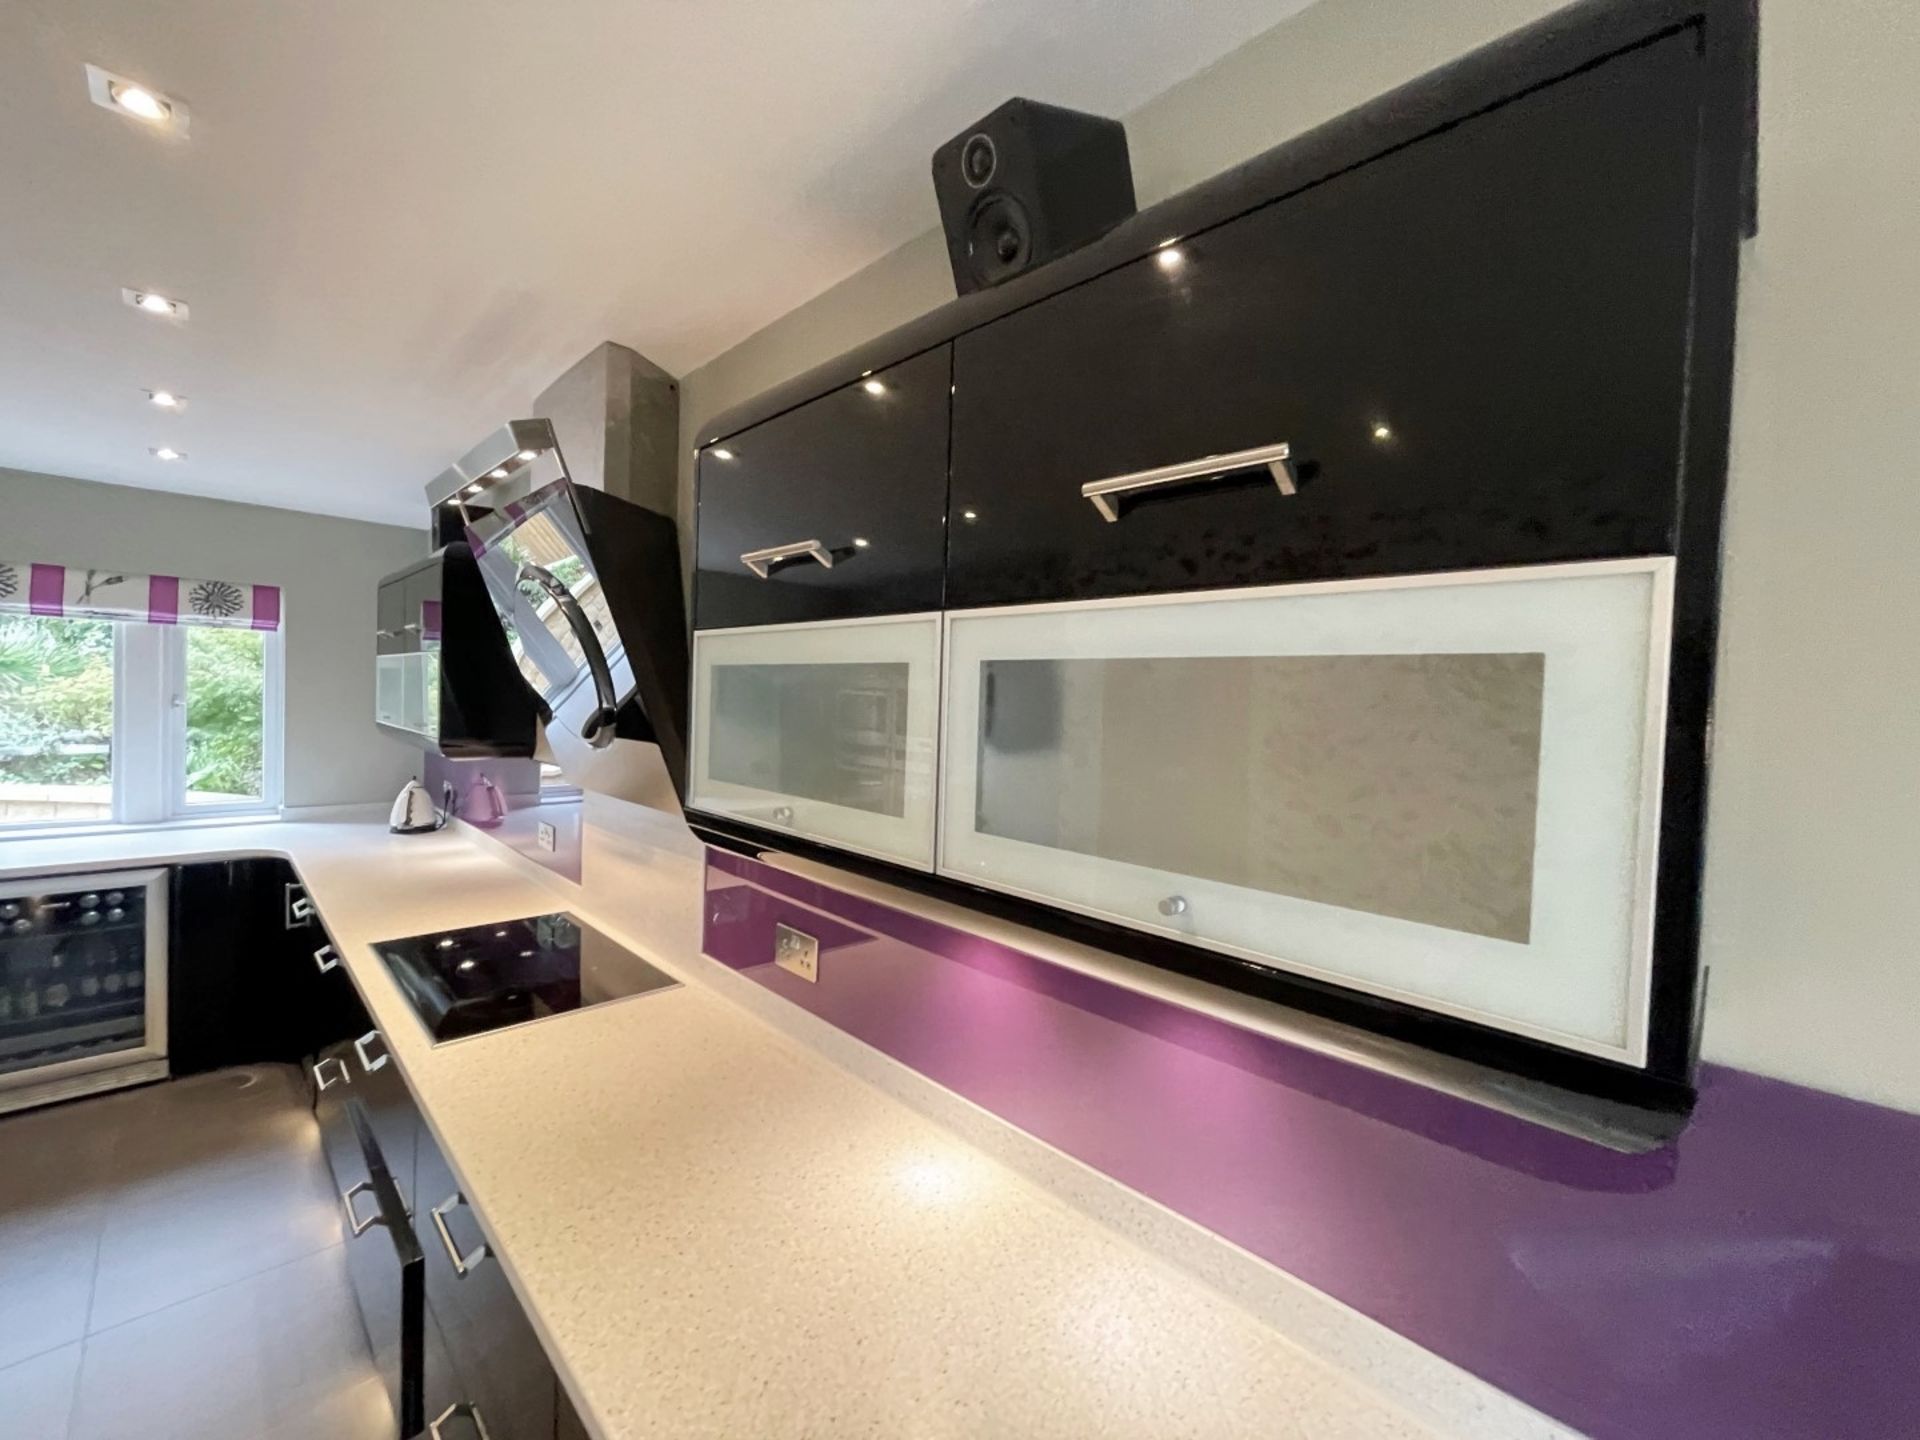 1 x MAGNET Modern Black Gloss Fitted Kitchen With Premium Branded Appliances + Corian Worktops - Image 42 of 62